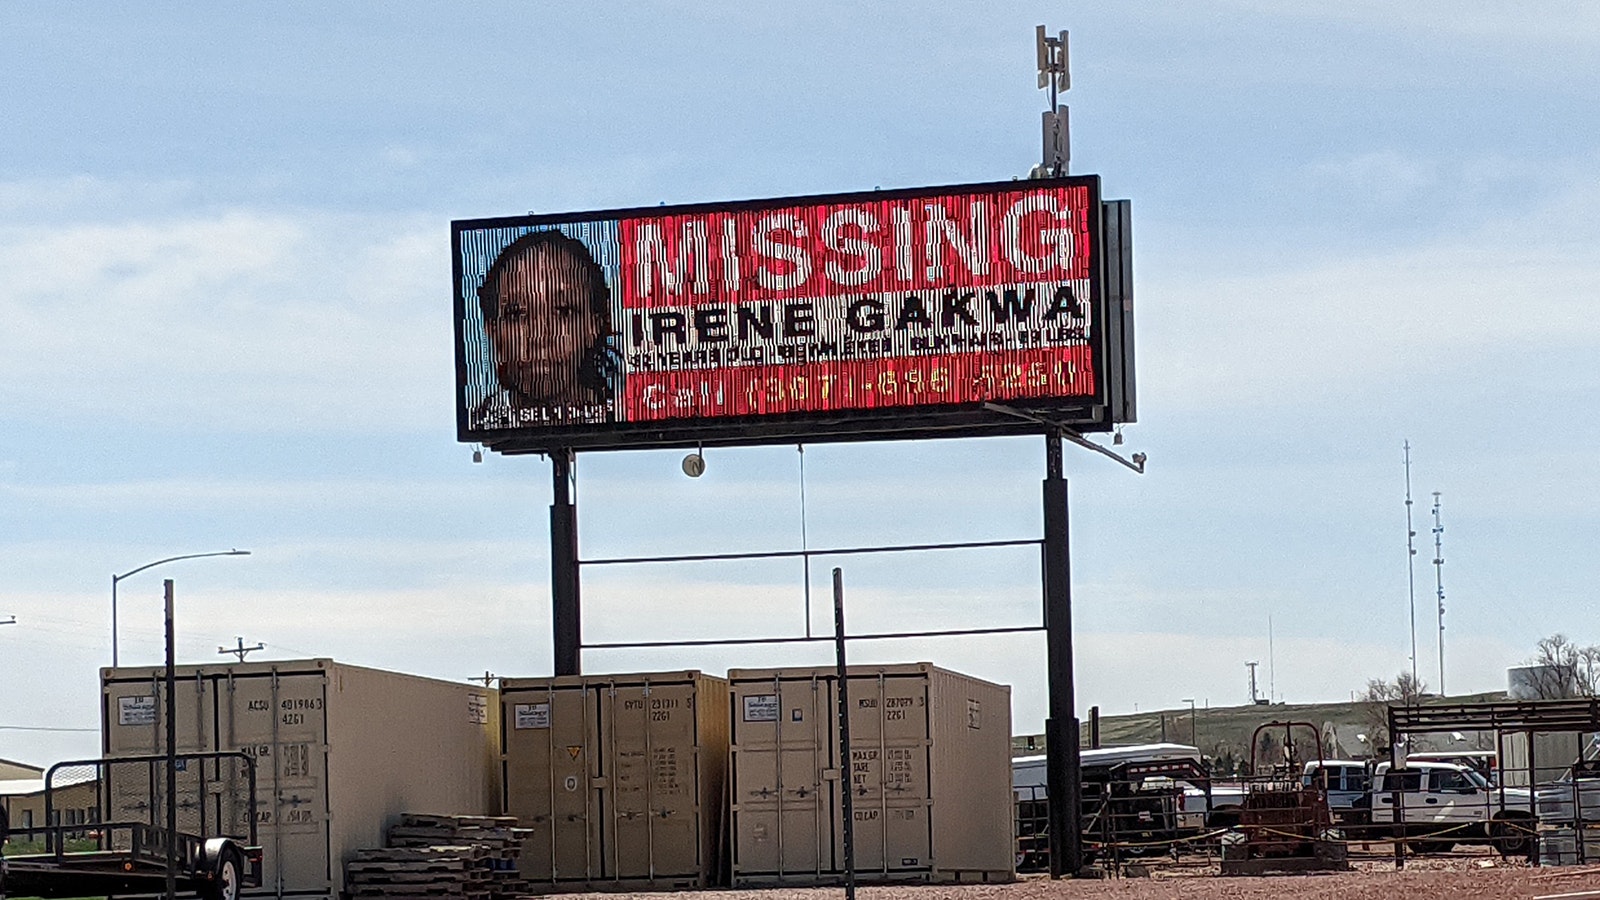 Even after an intense search for Irene Gakwa, a nursing student from Kenya living in Gillette, Wyoming, she remains missing.